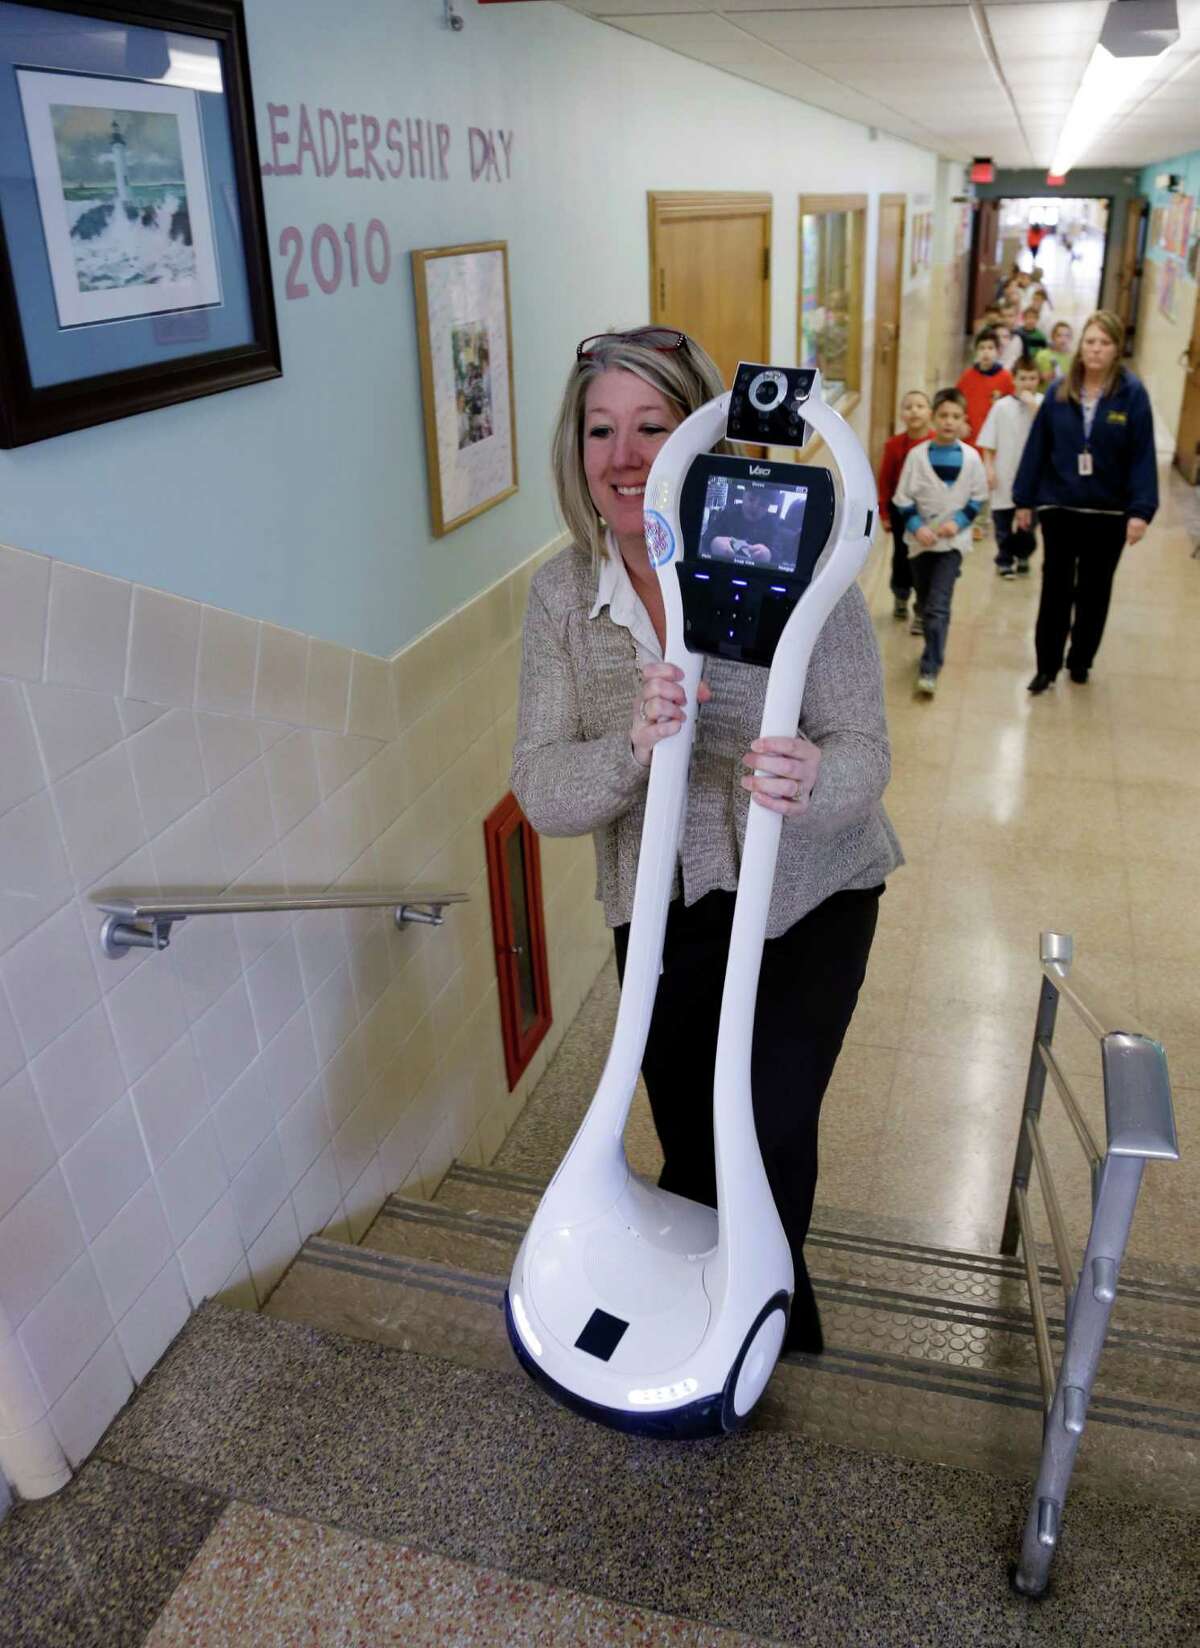 In this Thursday, Jan. 24, 2013 photo, Winchester Elementary School teacher Dawn Voelker carries a robot up the stairs that is being operated by Devon Carrow while he is attending school at in West Seneca N.Y. Carrow's life-threatening allergies don't allow him to go to school. But the 4-foot-tall robot with a wireless video hookup gives him the school experience remotely, allowing him to participate in class, stroll through the hallways, hang out at recess and even take to the auditorium stage when there's a show. (AP Photo/David Duprey)